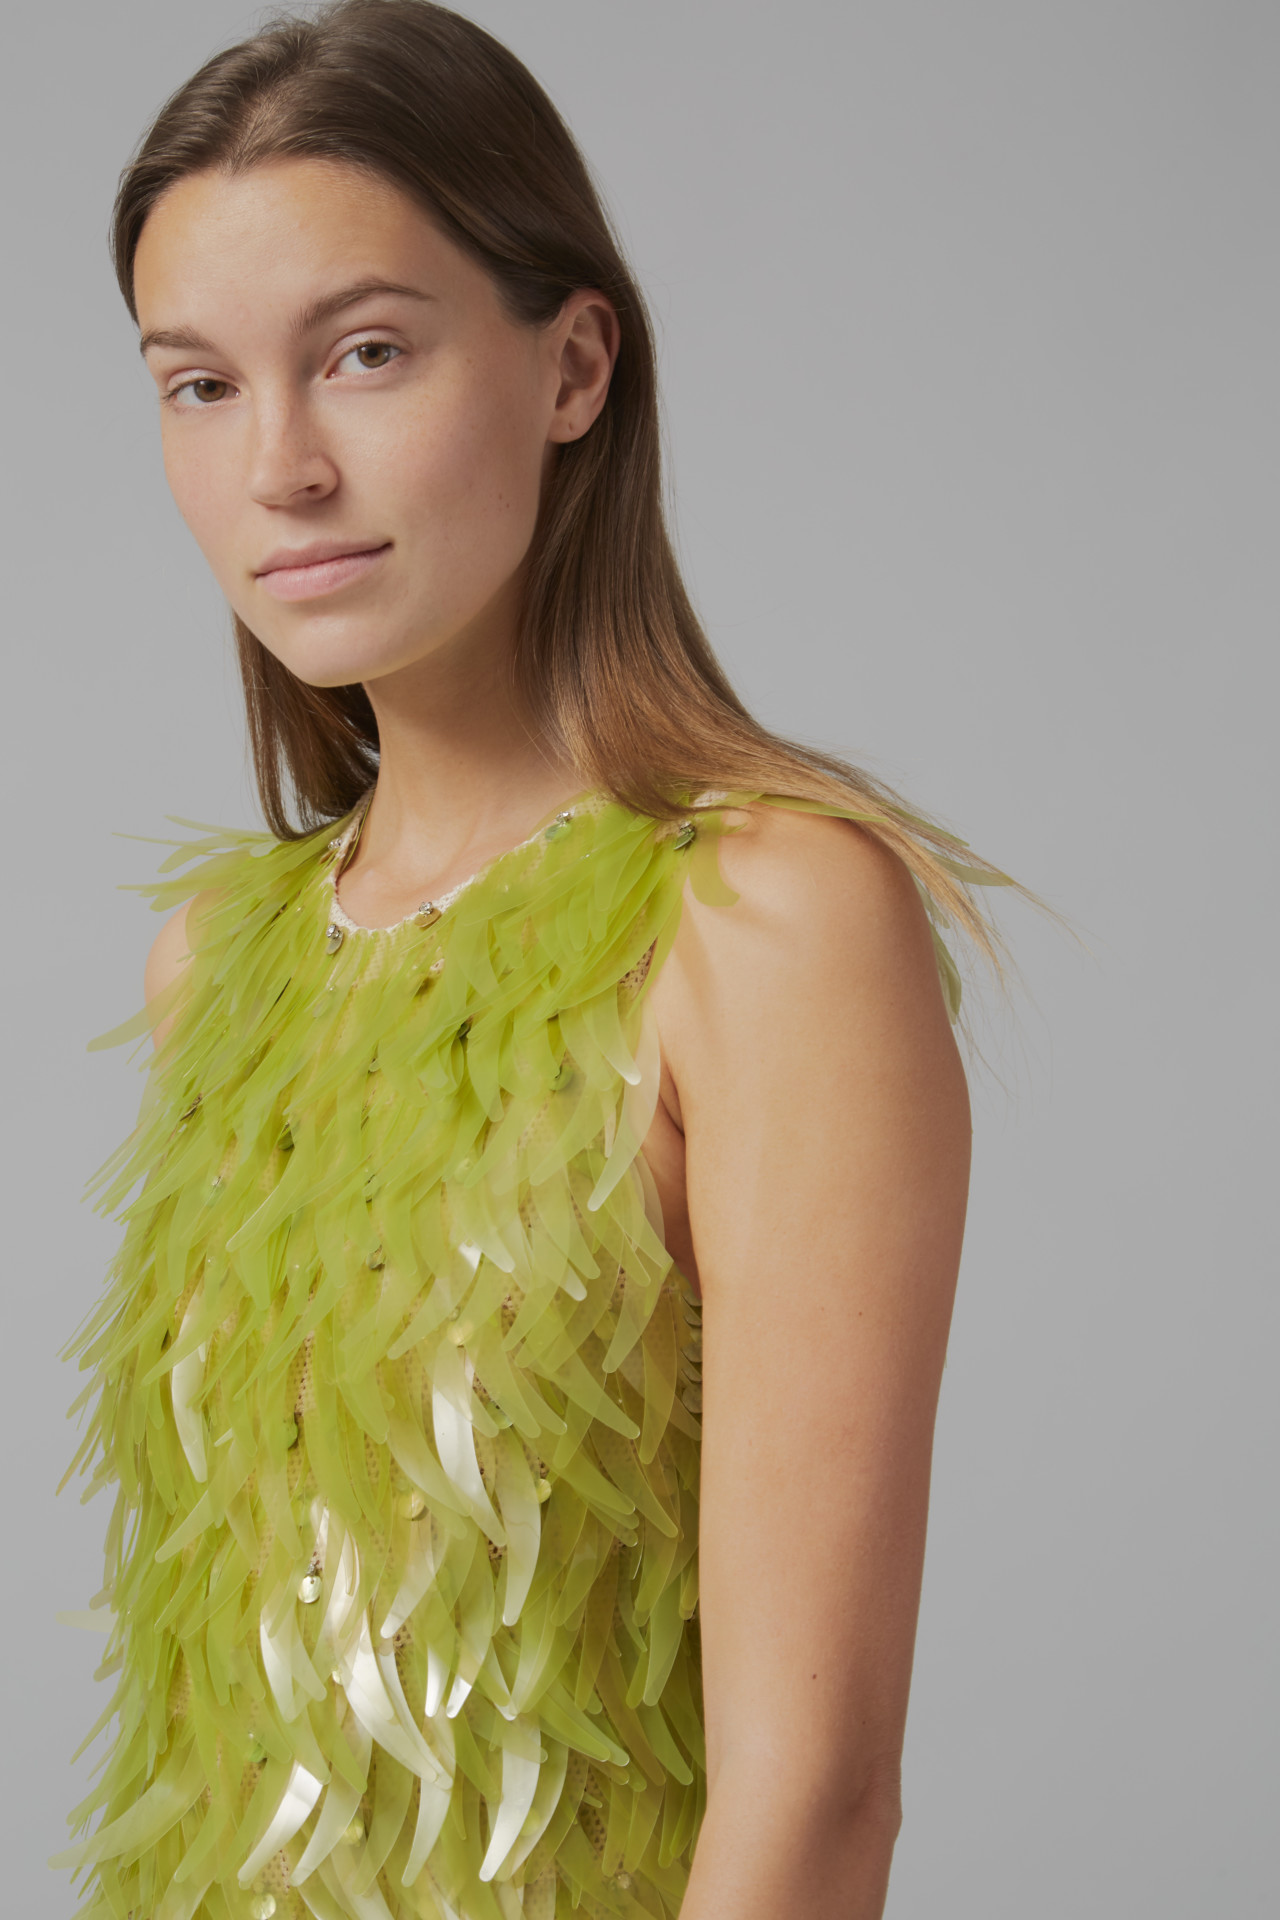 A green dress for waste age made from algae